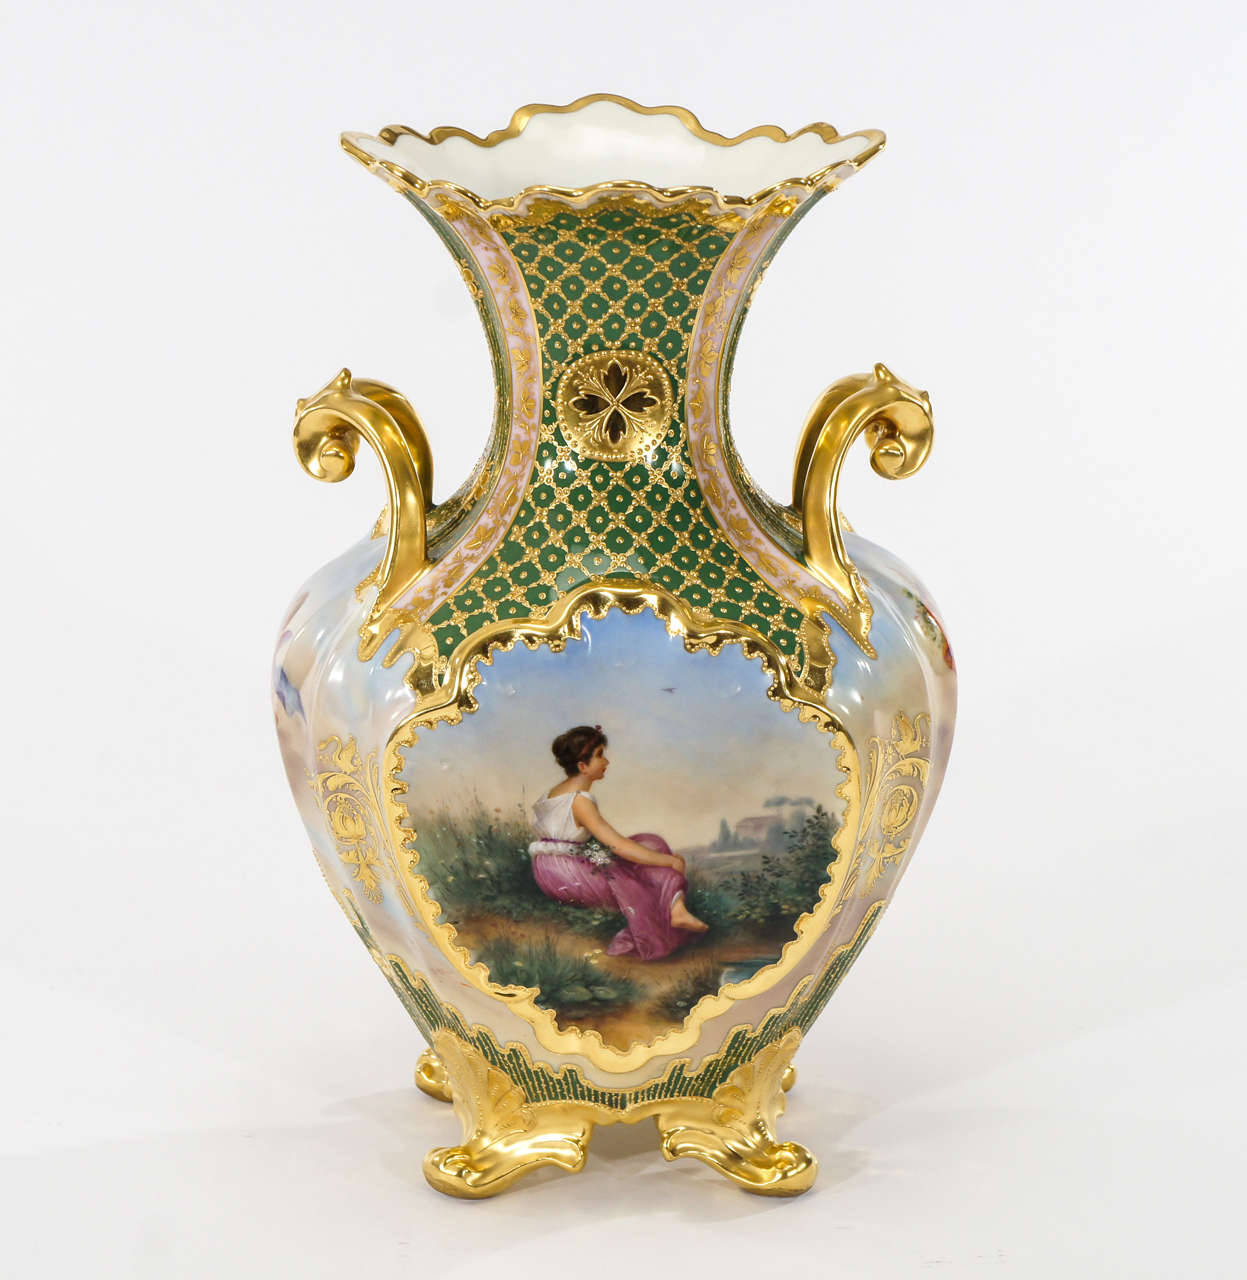 An extraordinary example of Vienna's renowned porcelain work. This vase is decorated on all four sides and completely hand painted with finely painted and detailed Romantic scenes of women and puttis. Every aspect is embellished with polychrome